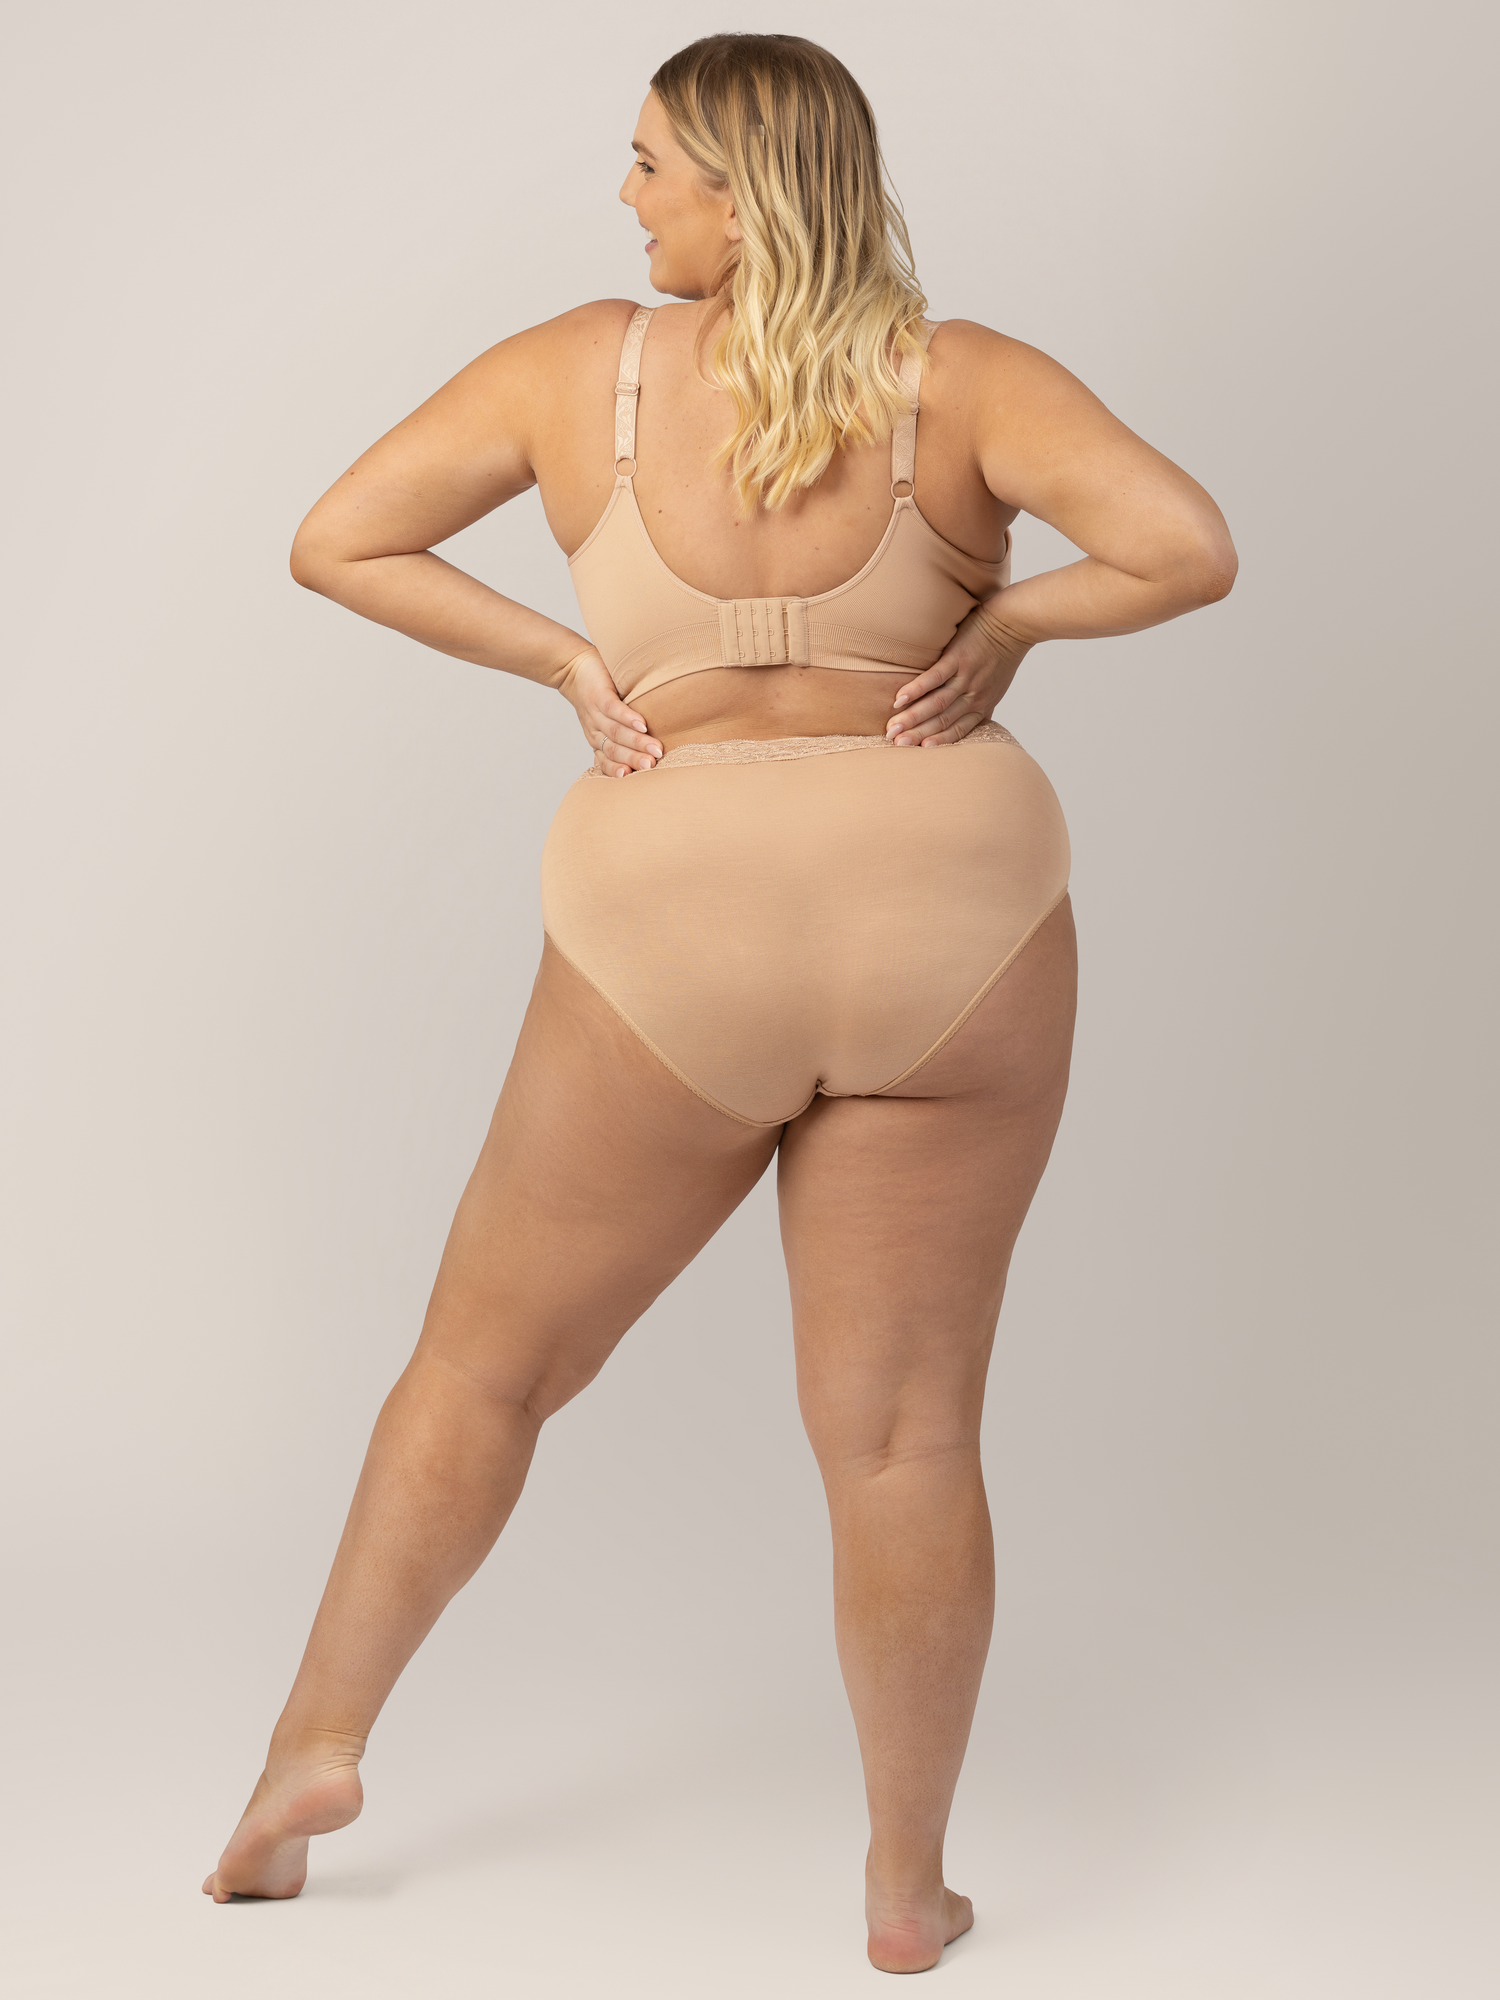 Back view of a model wearing the Simply Sublime® Nursing Bra in Beige